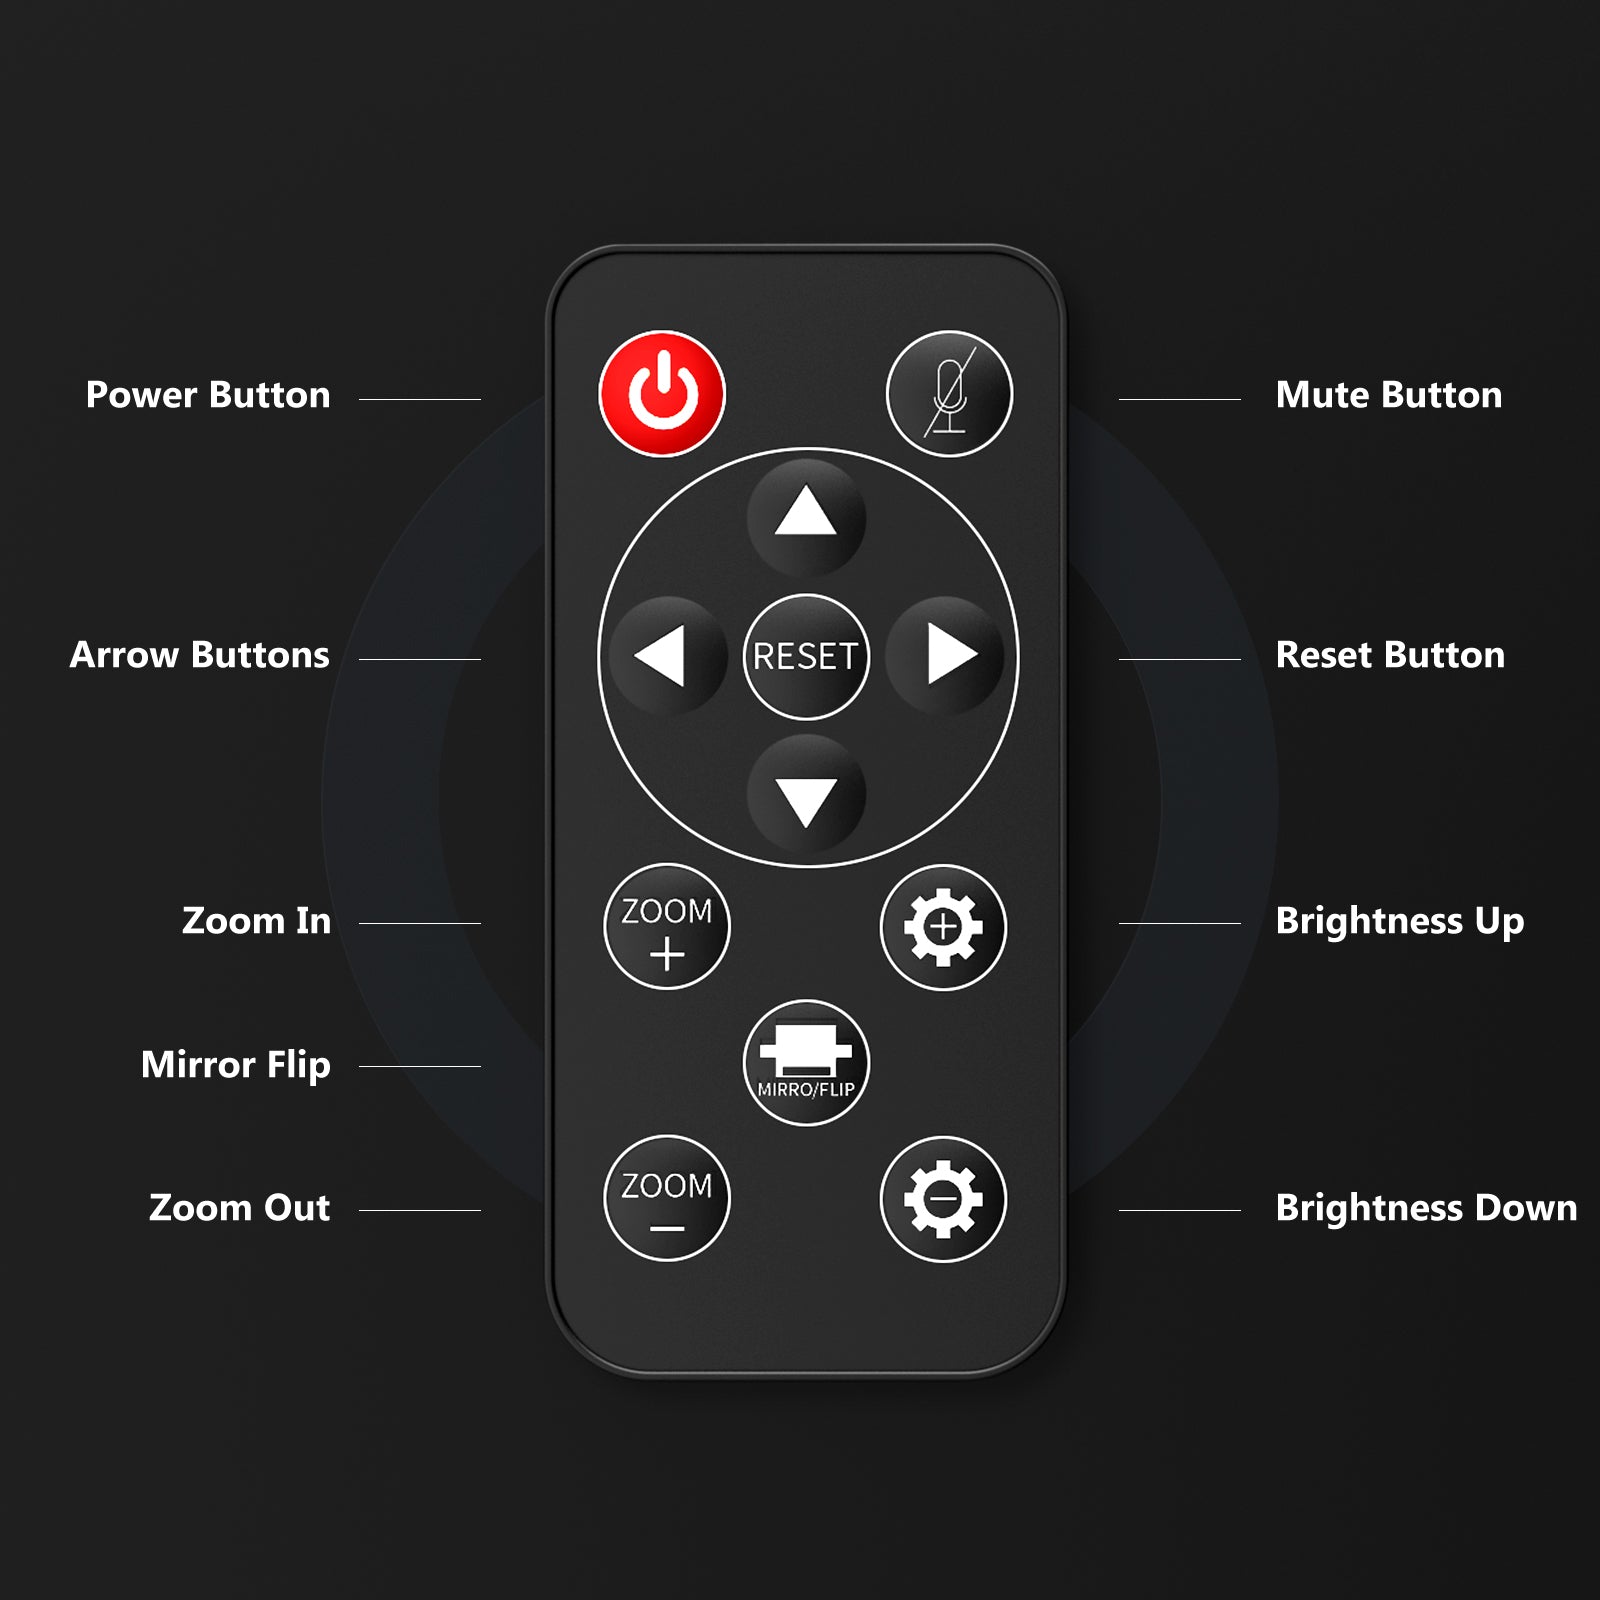 The N940E remote control is designed with Power, Arrow, Zoom In, Mirror Flip, Zoom Out, Mute, Reset, Brightness Up, and Brightness Down buttons.